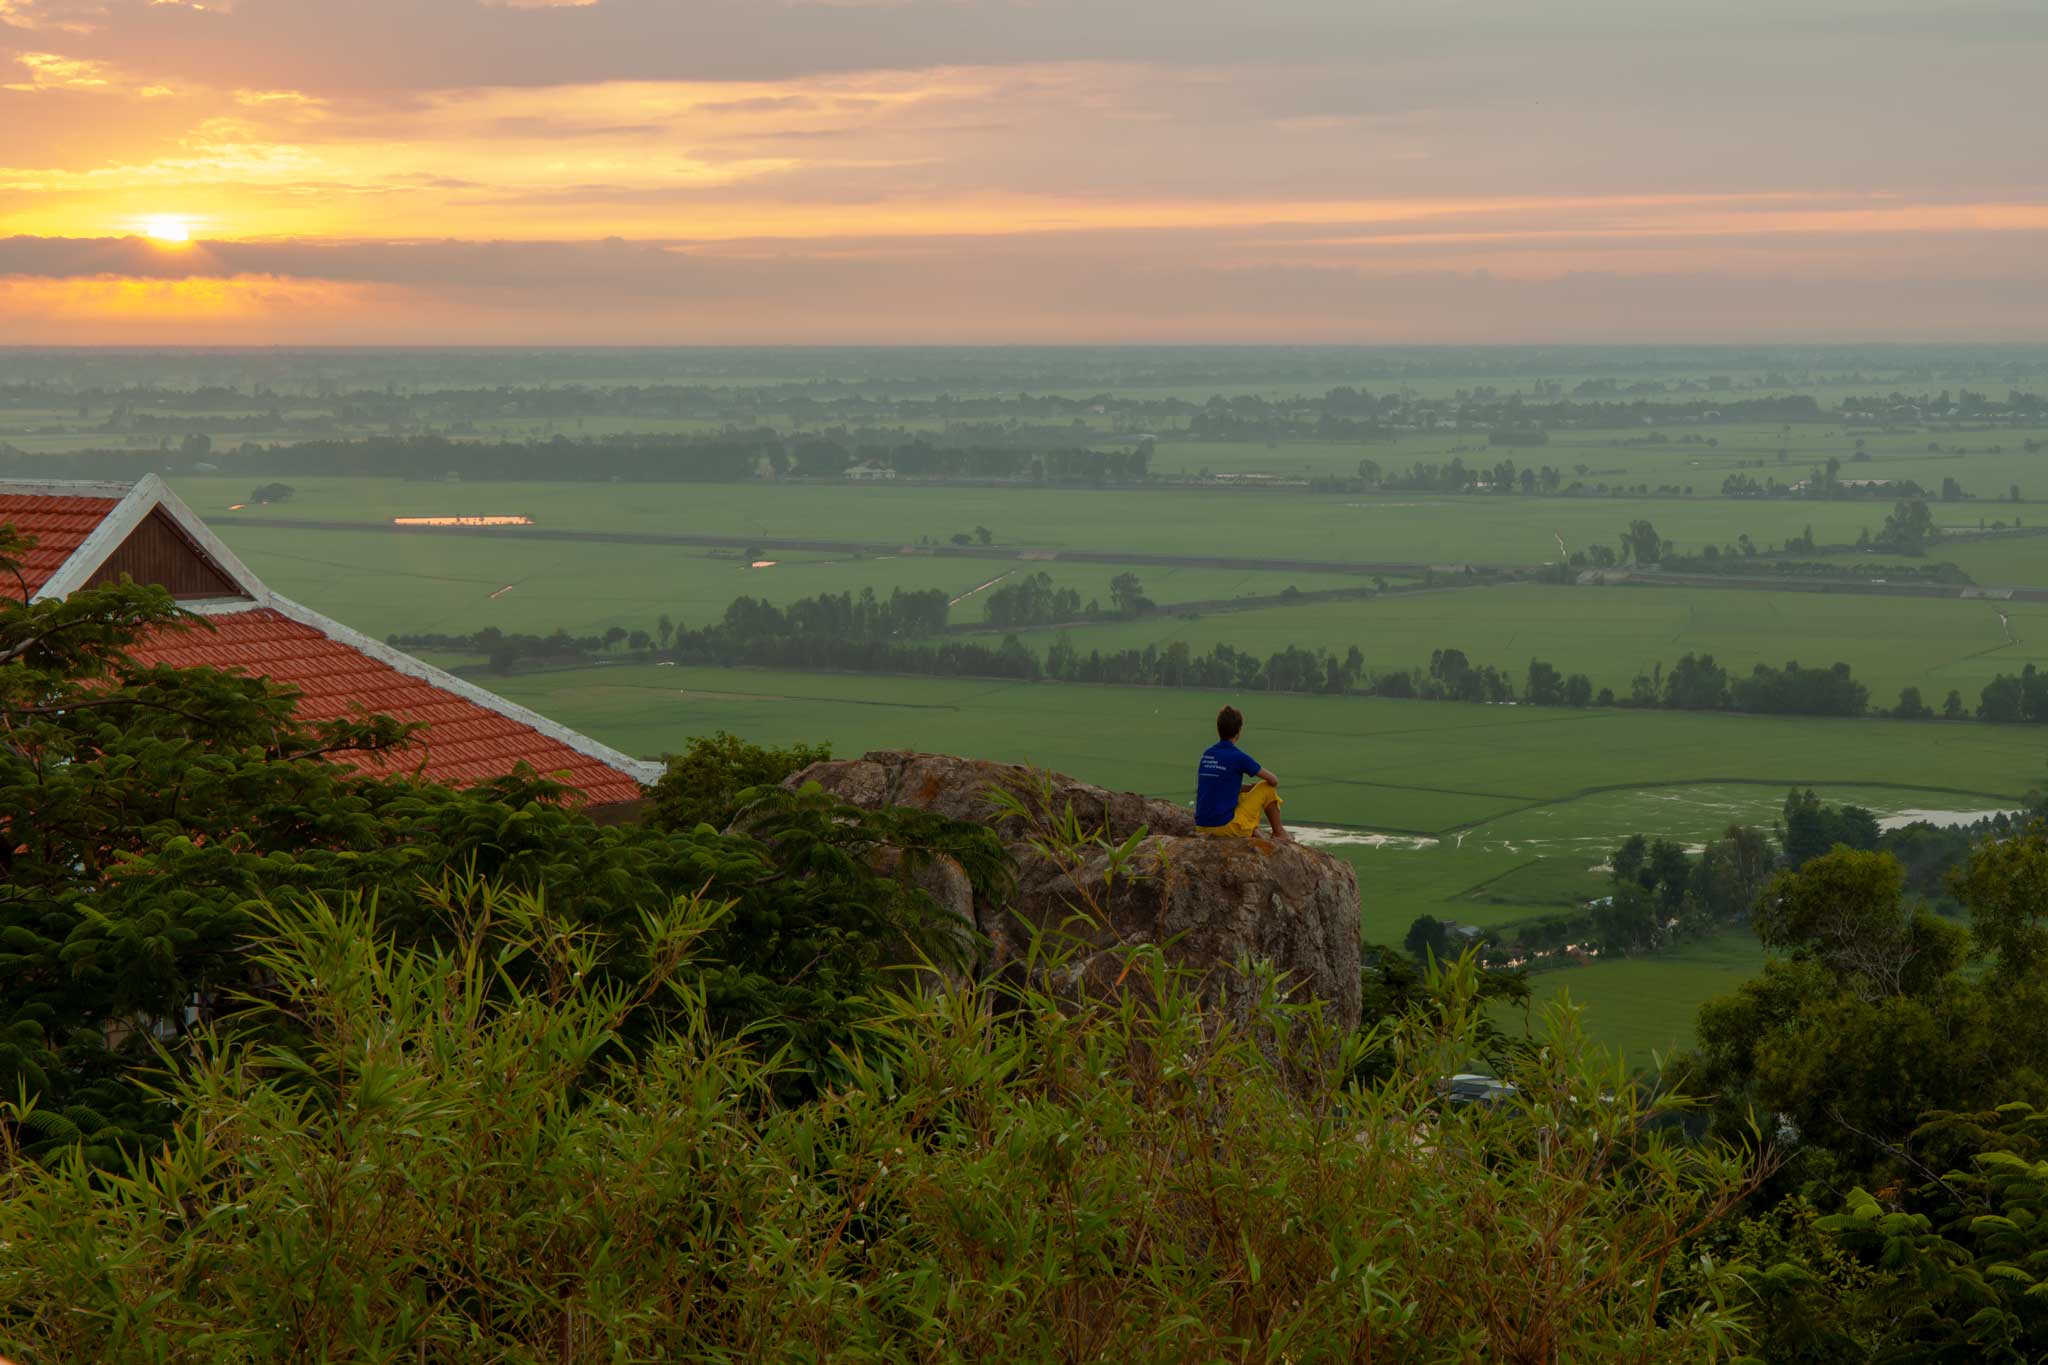 Green rice fields of Chau Doc as seen while perched on a rock